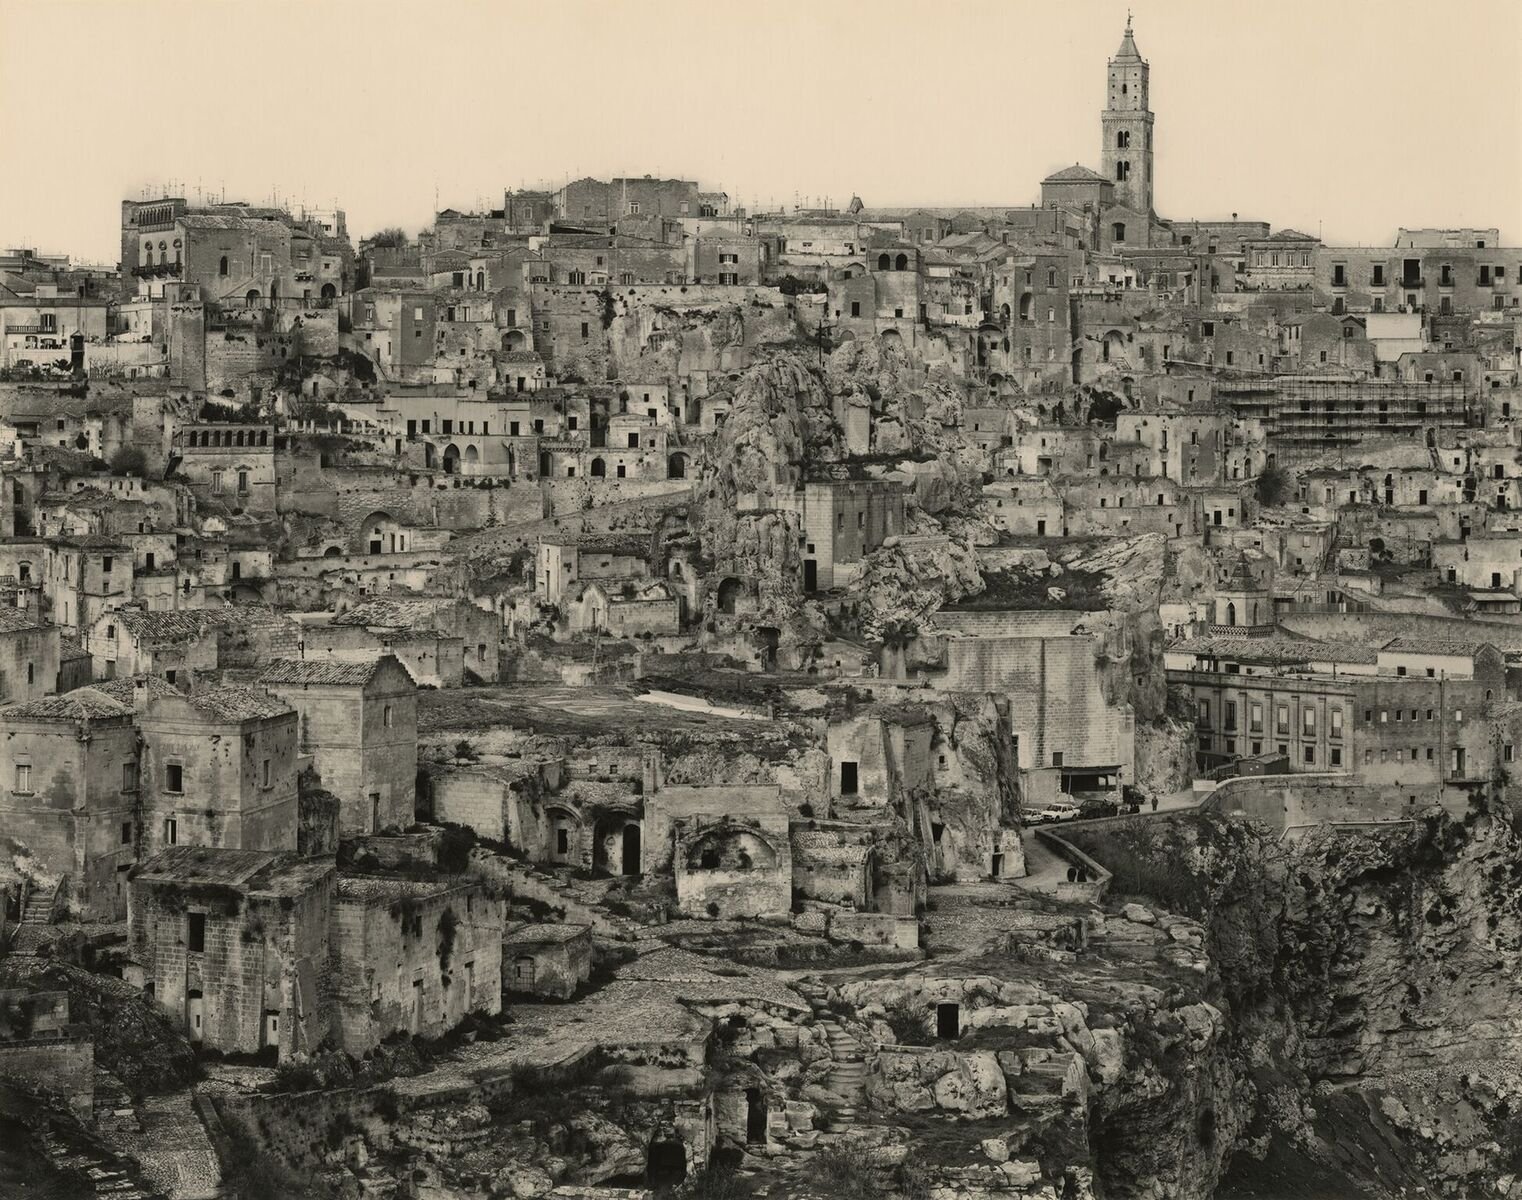 Emmet Gowin, Matera, 1980, Courtesy of Pace MacGill Gallery, New York, George Eastman House